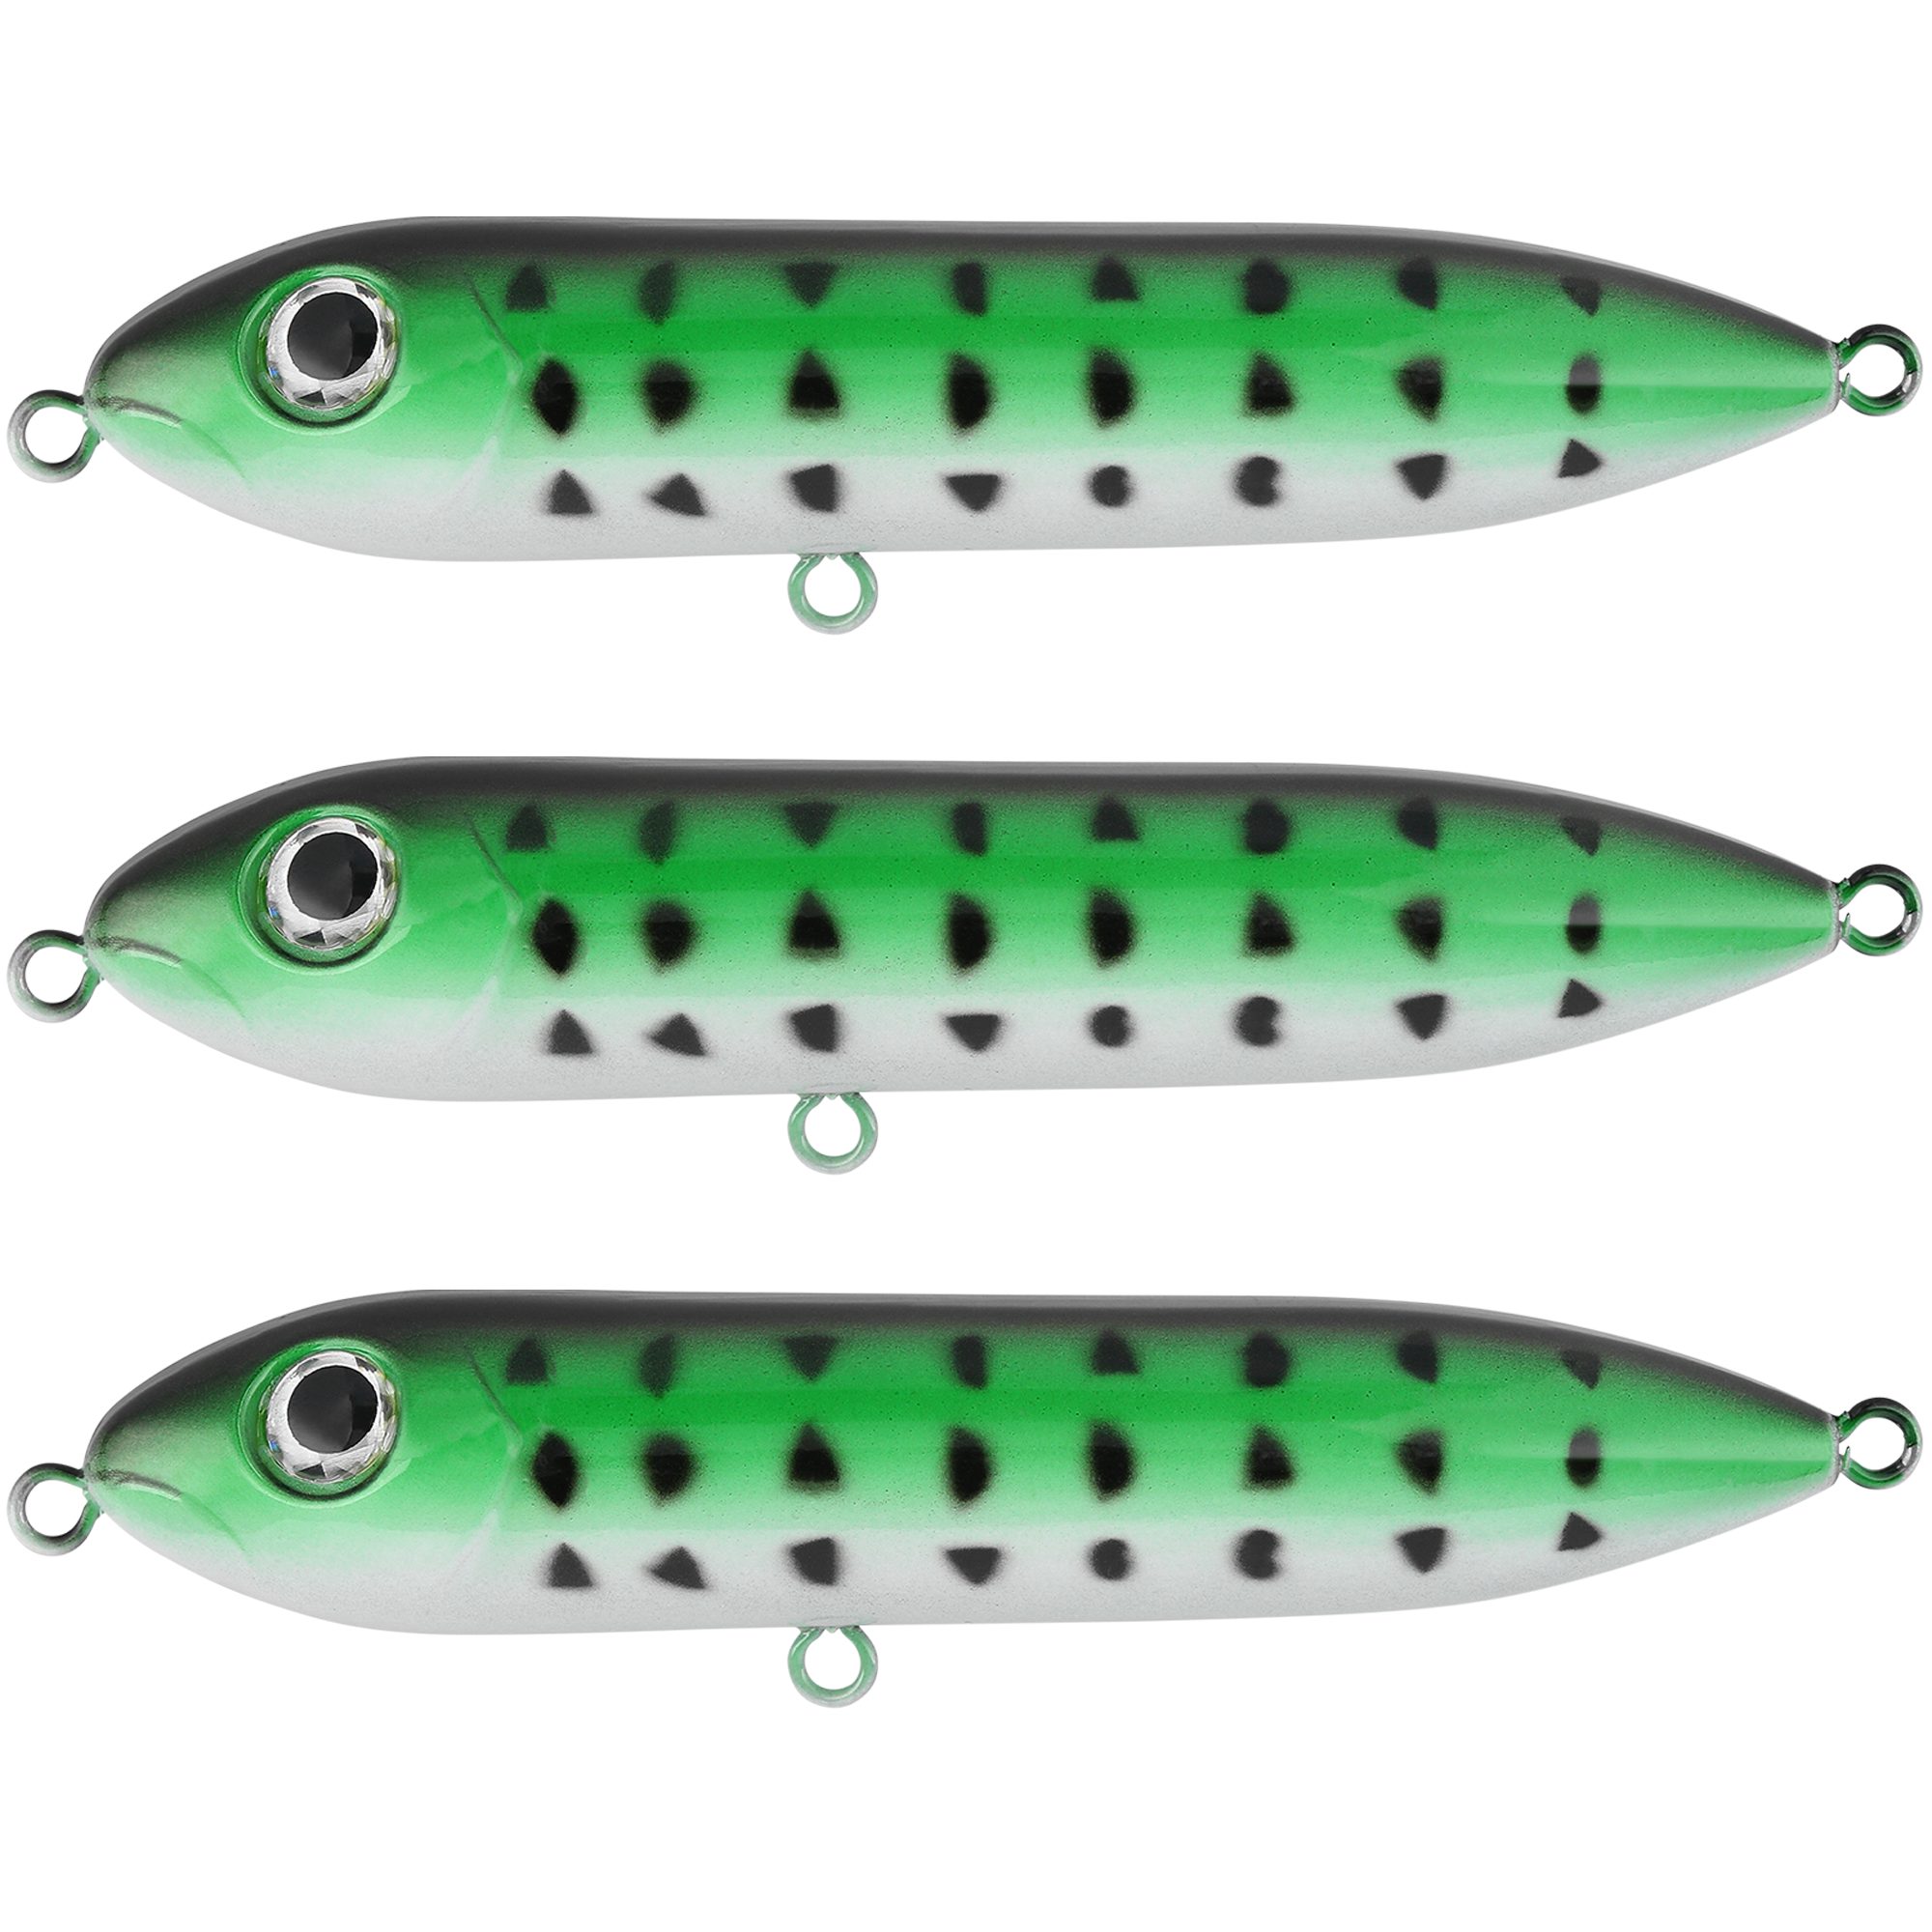 Catfish Rattling Line Float Lure for Catfishing, Demon Dragon Style Peg for Santee Rig Fishing, 4 inch (3-Pack, Green Crappie)